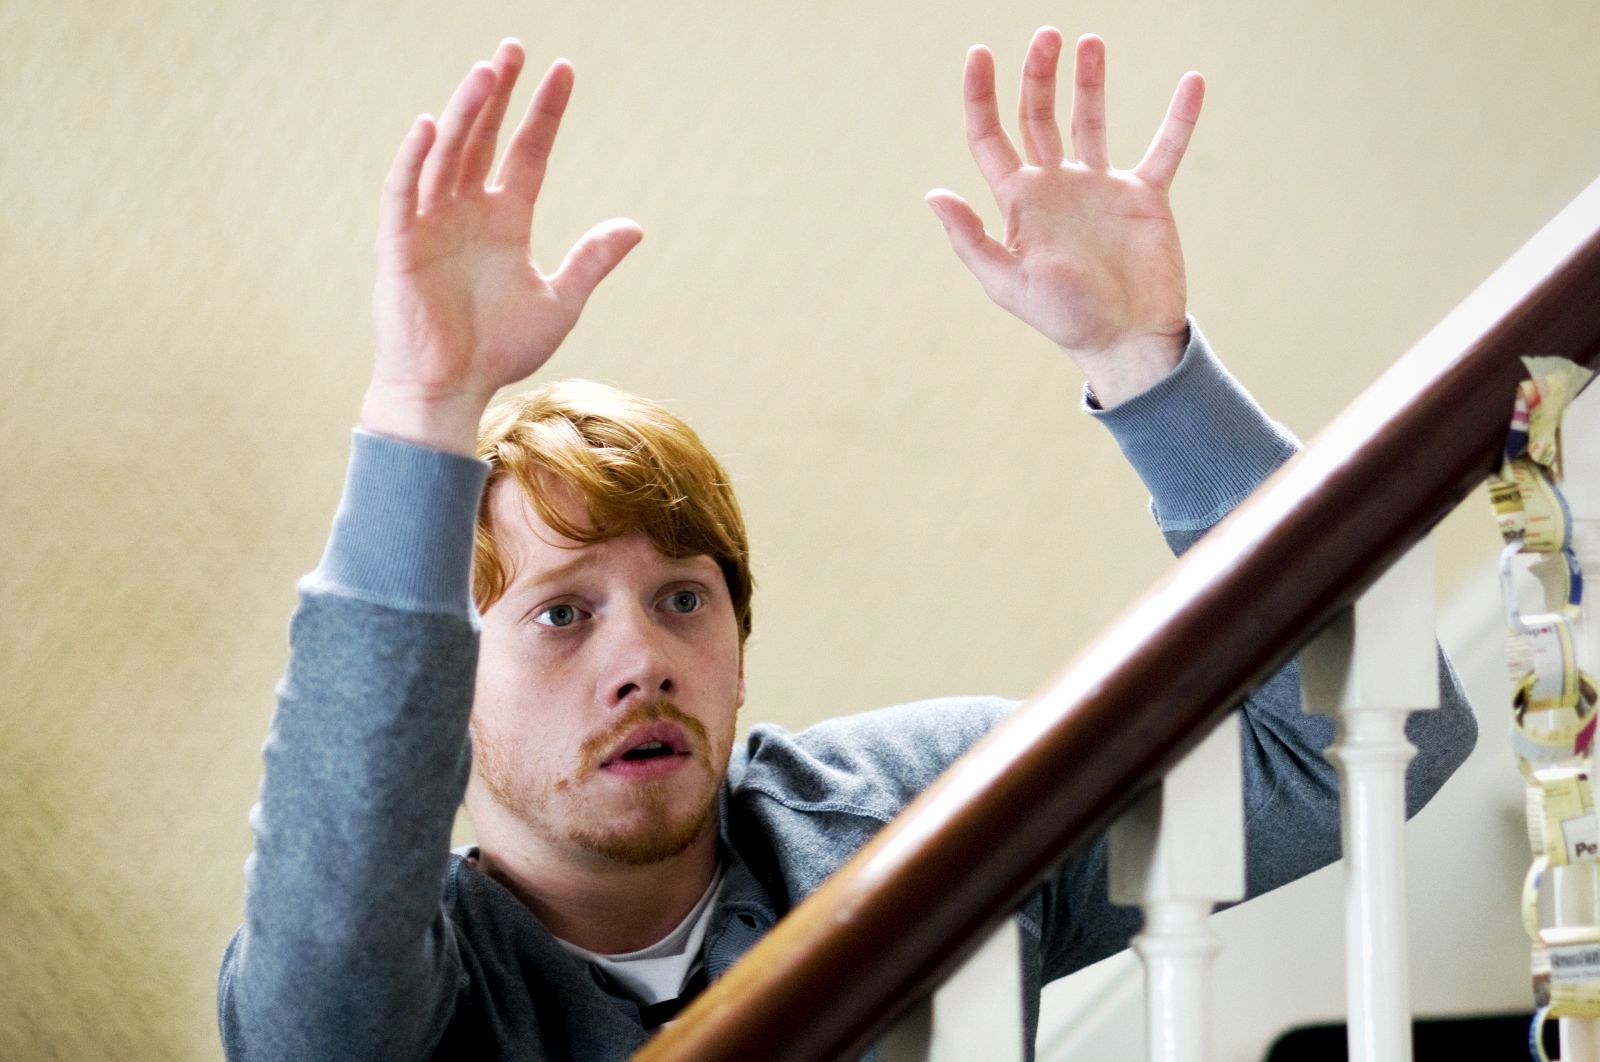 Rupert Grint stars as Tony in Freestyle Releasing's Wild Target (2010)